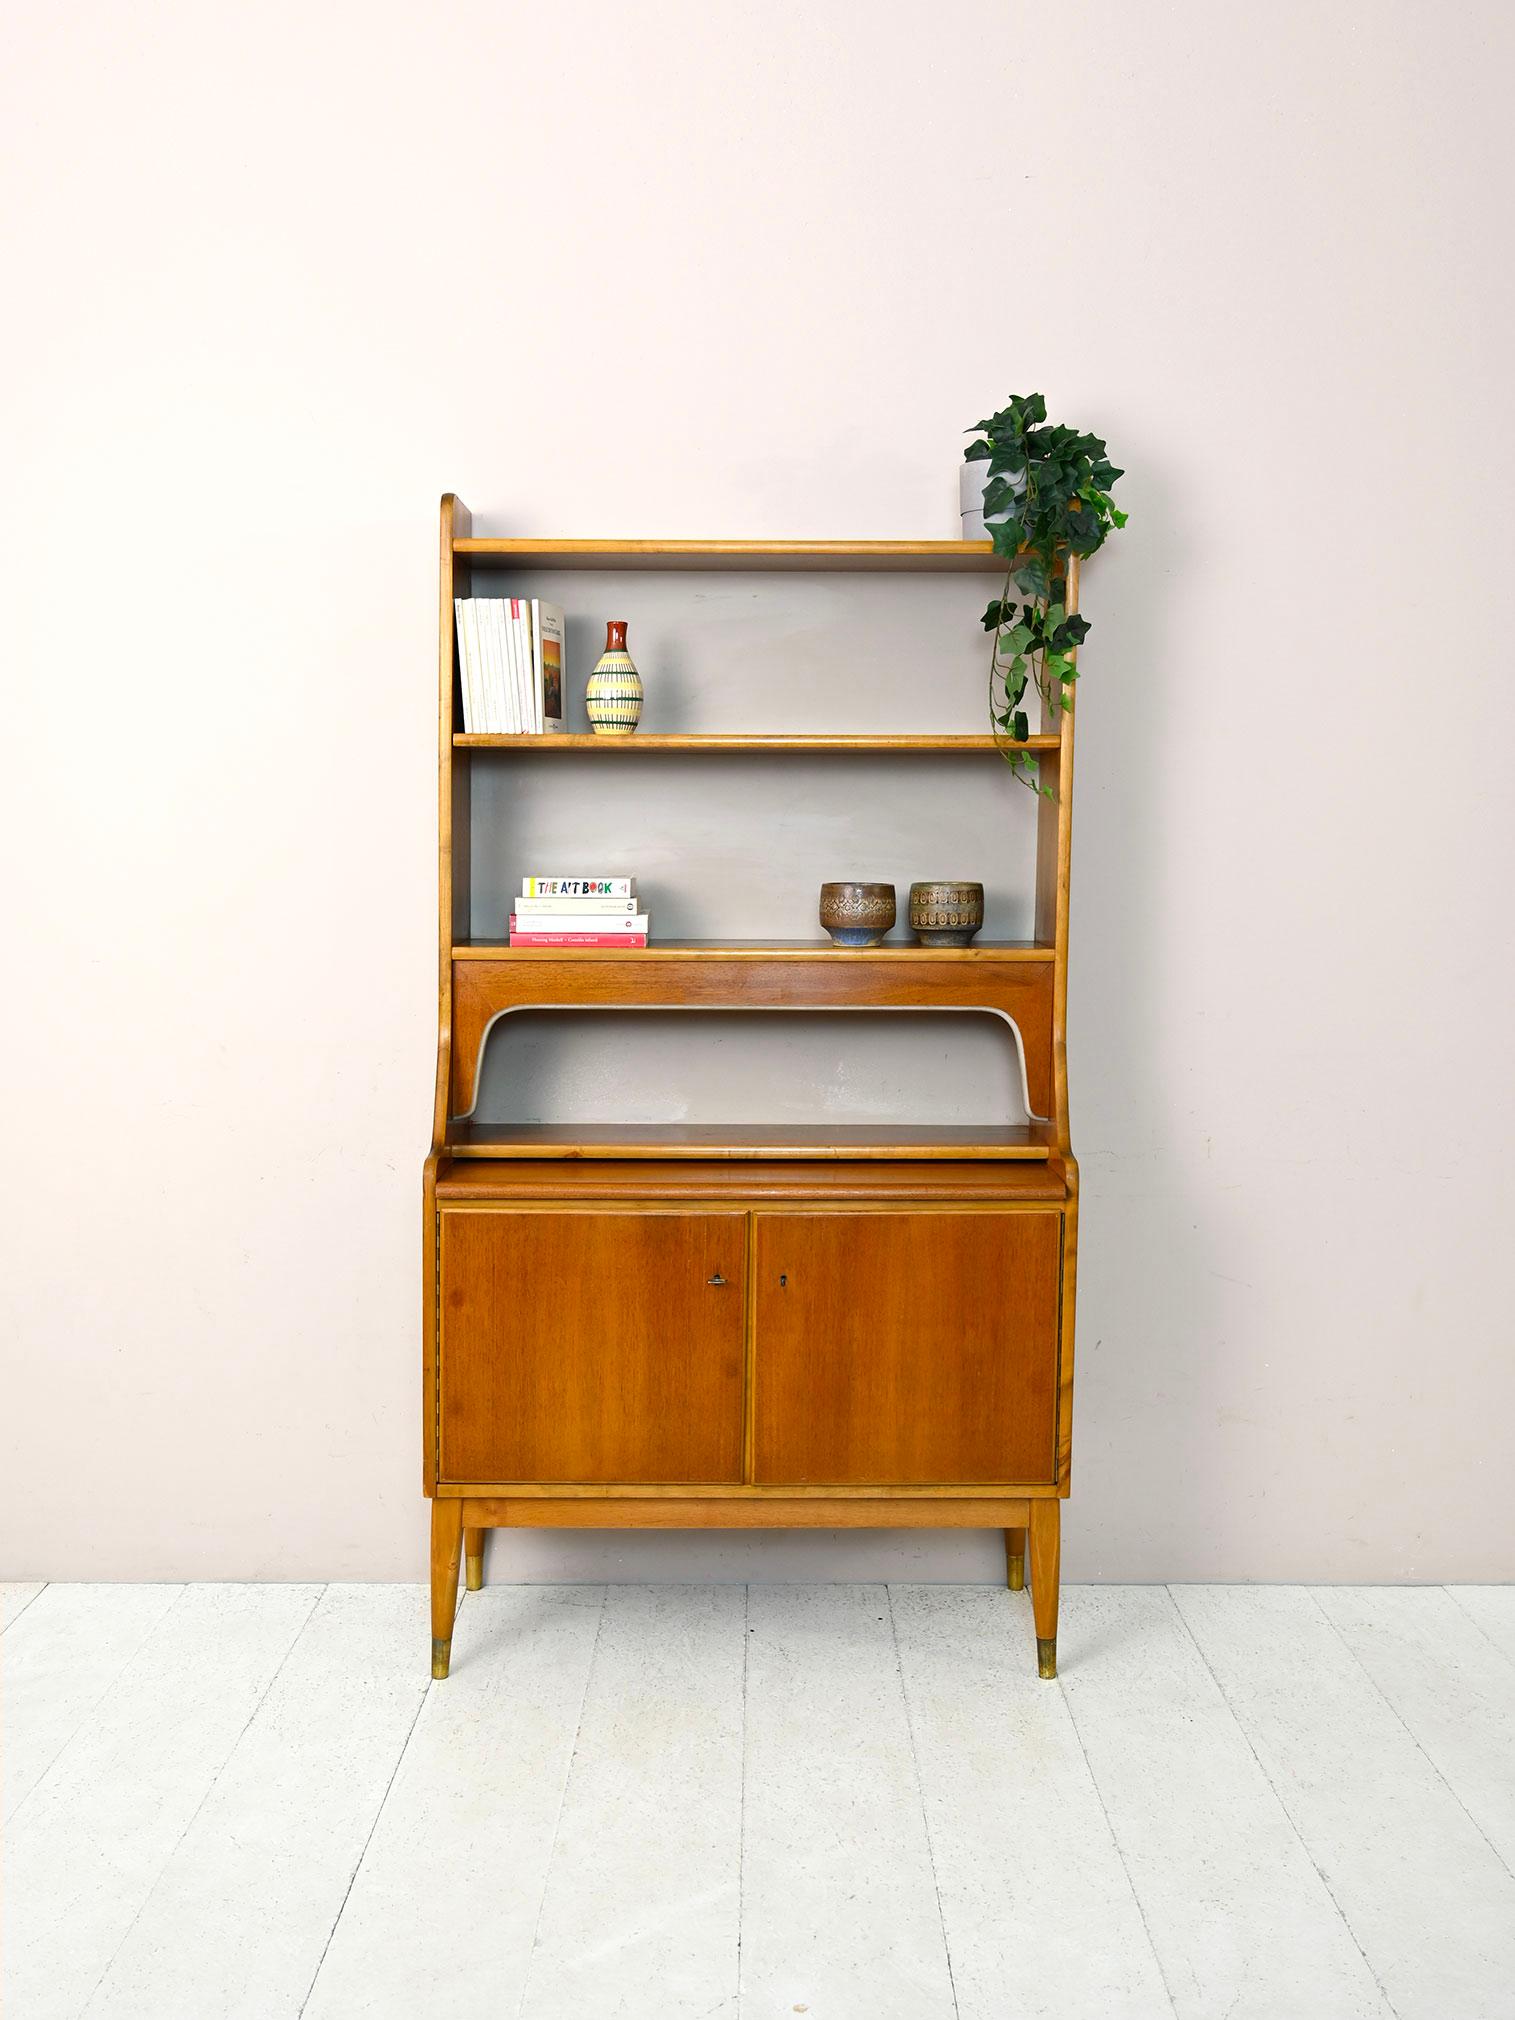 Particular original Swedish bookcase cabinet from the 1960s.

The structure consists of a cabinet with lockable hinged doors inside which are two small drawers and a shelf; the top can be pulled out if necessary become a convenient desk. The upper